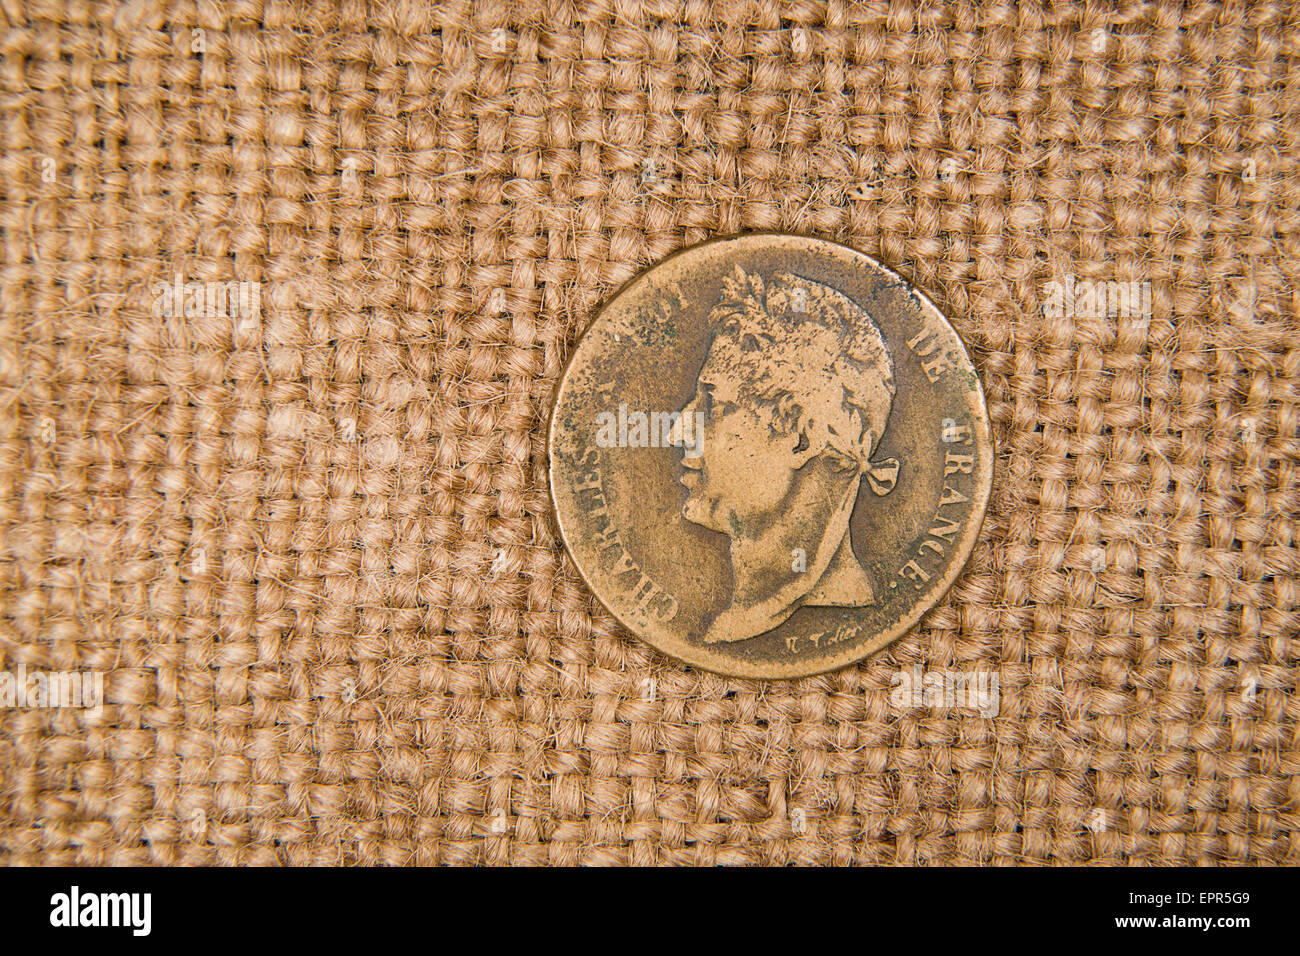 A lot of old bronze coin with portrait of king on the old cloth Stock Photo